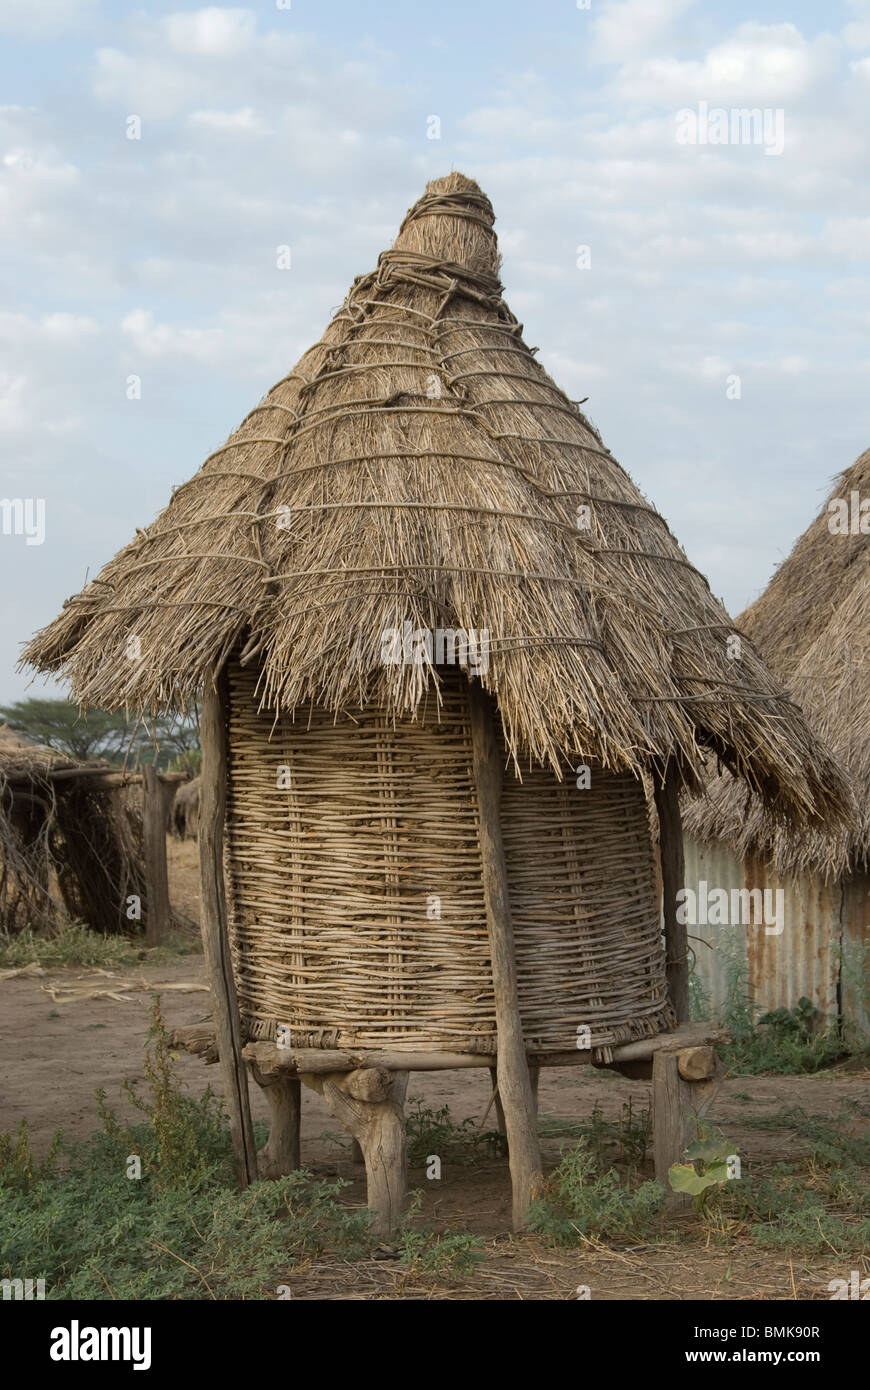 Ethiopia: Lower Omo River Basin, Karo village of Duss, thatched home on stilts for chickens Stock Photo